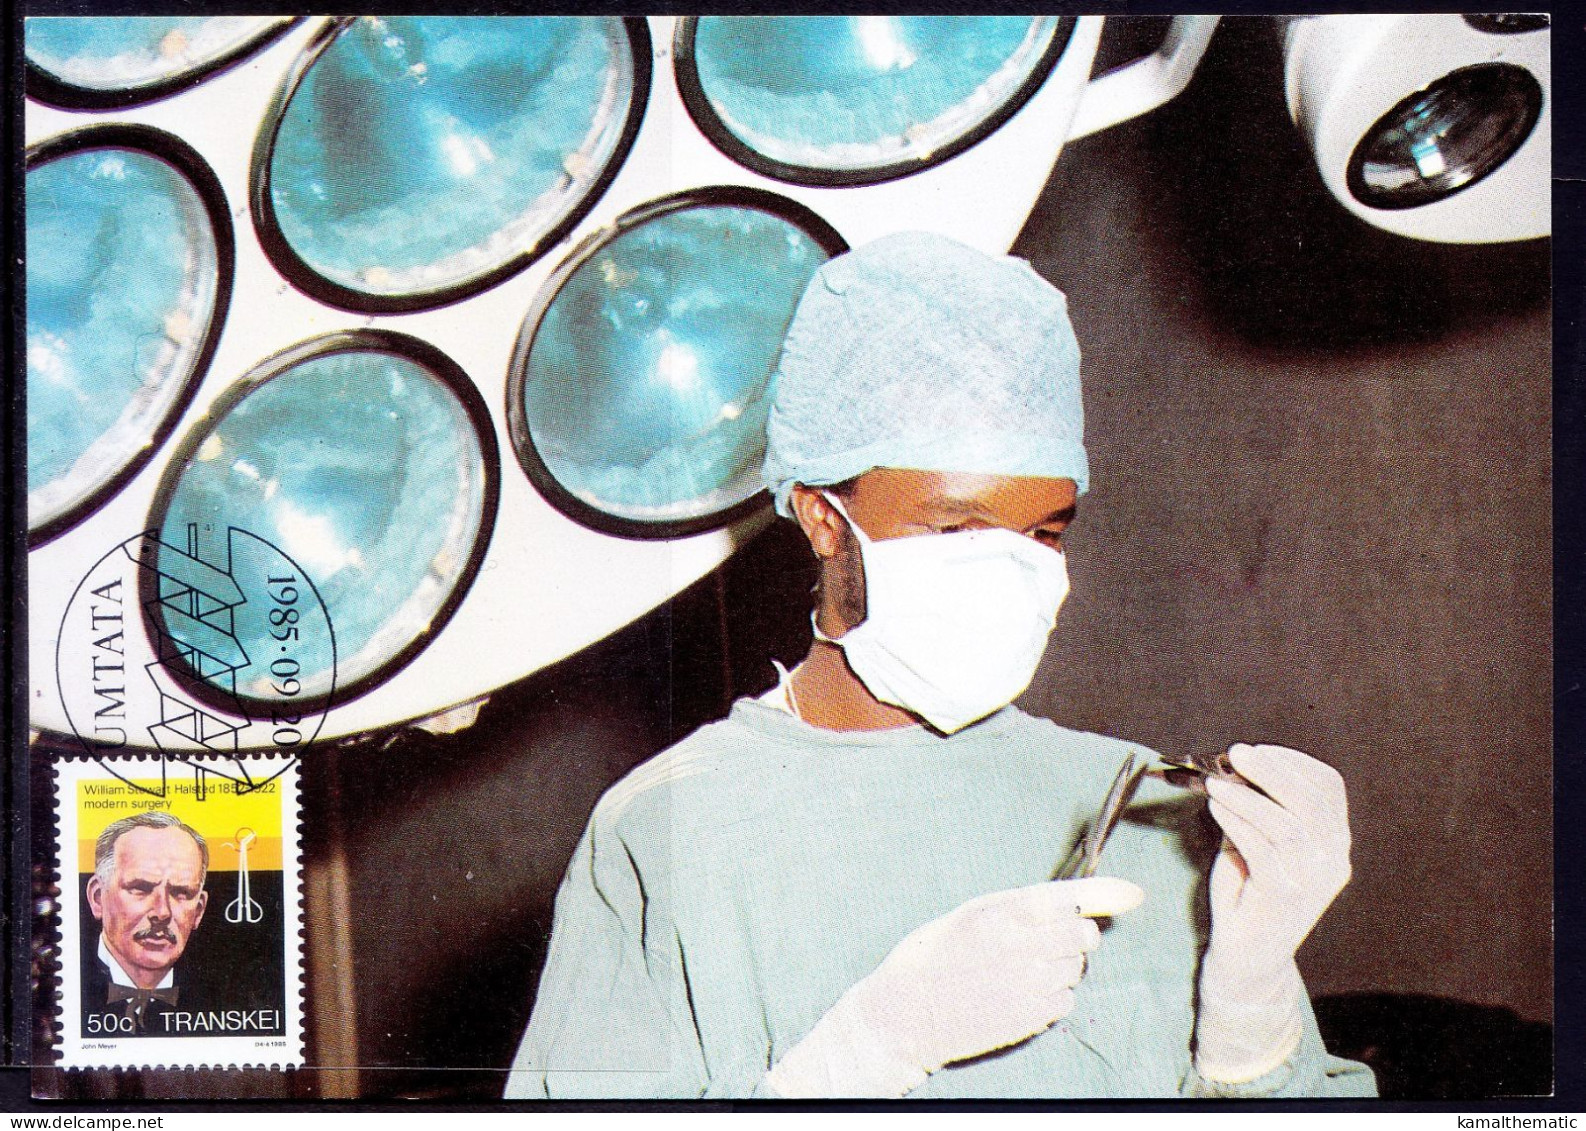 Surgeon William S Halsted, Aseptic Technique, Modern Surgery, Transkei 1985 Maxi Card - Medicina